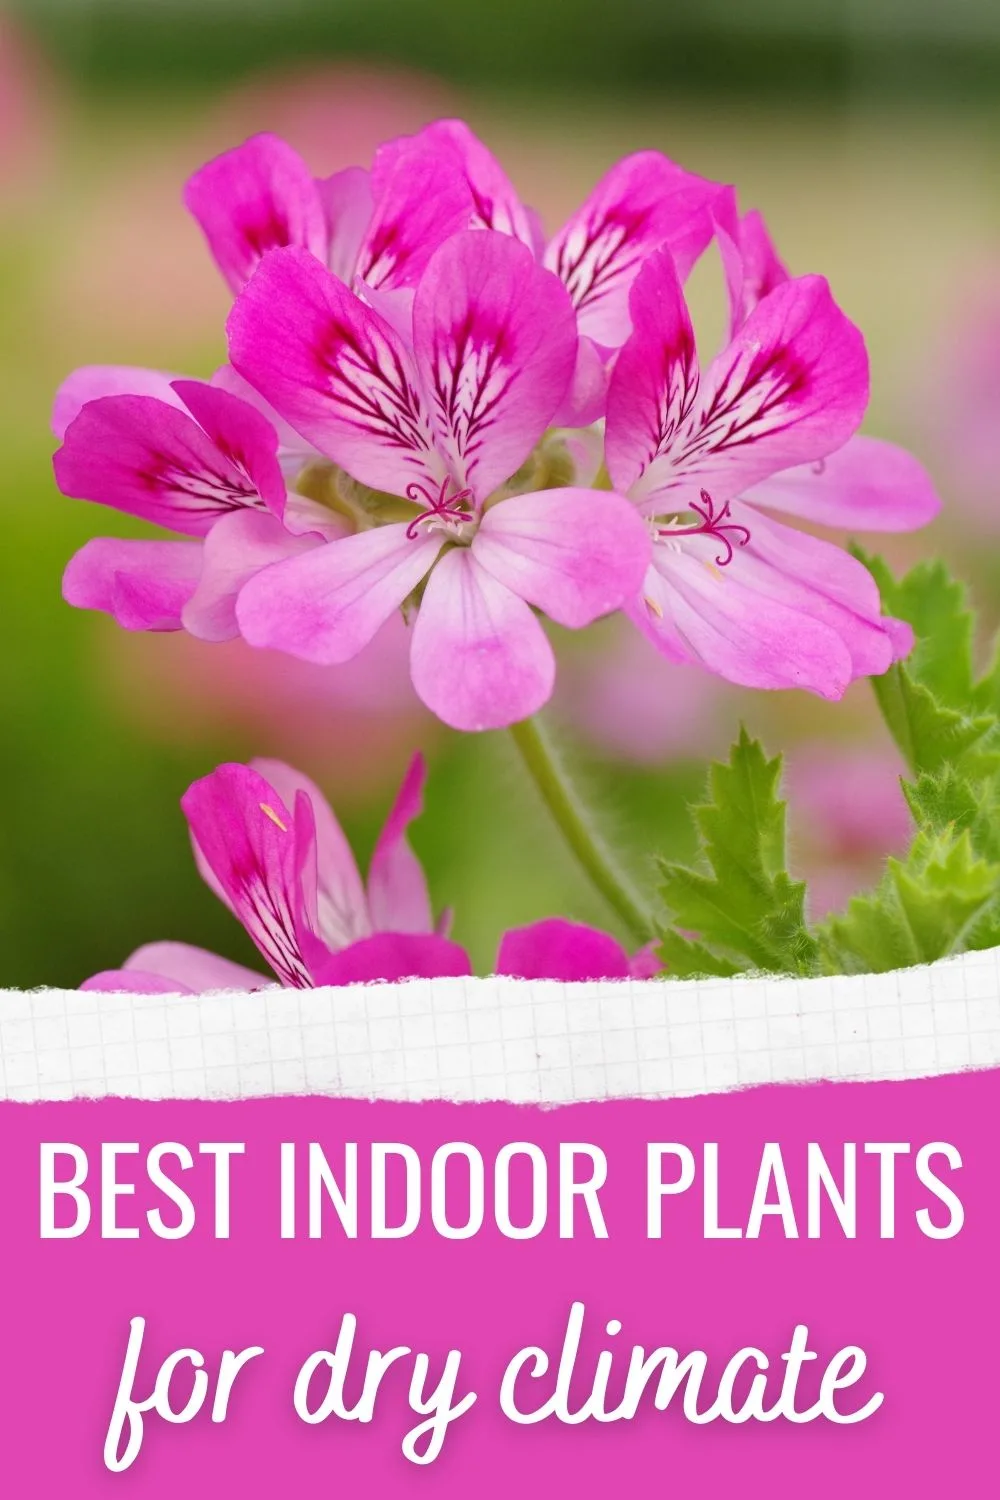 Best indoor plants for dry climate